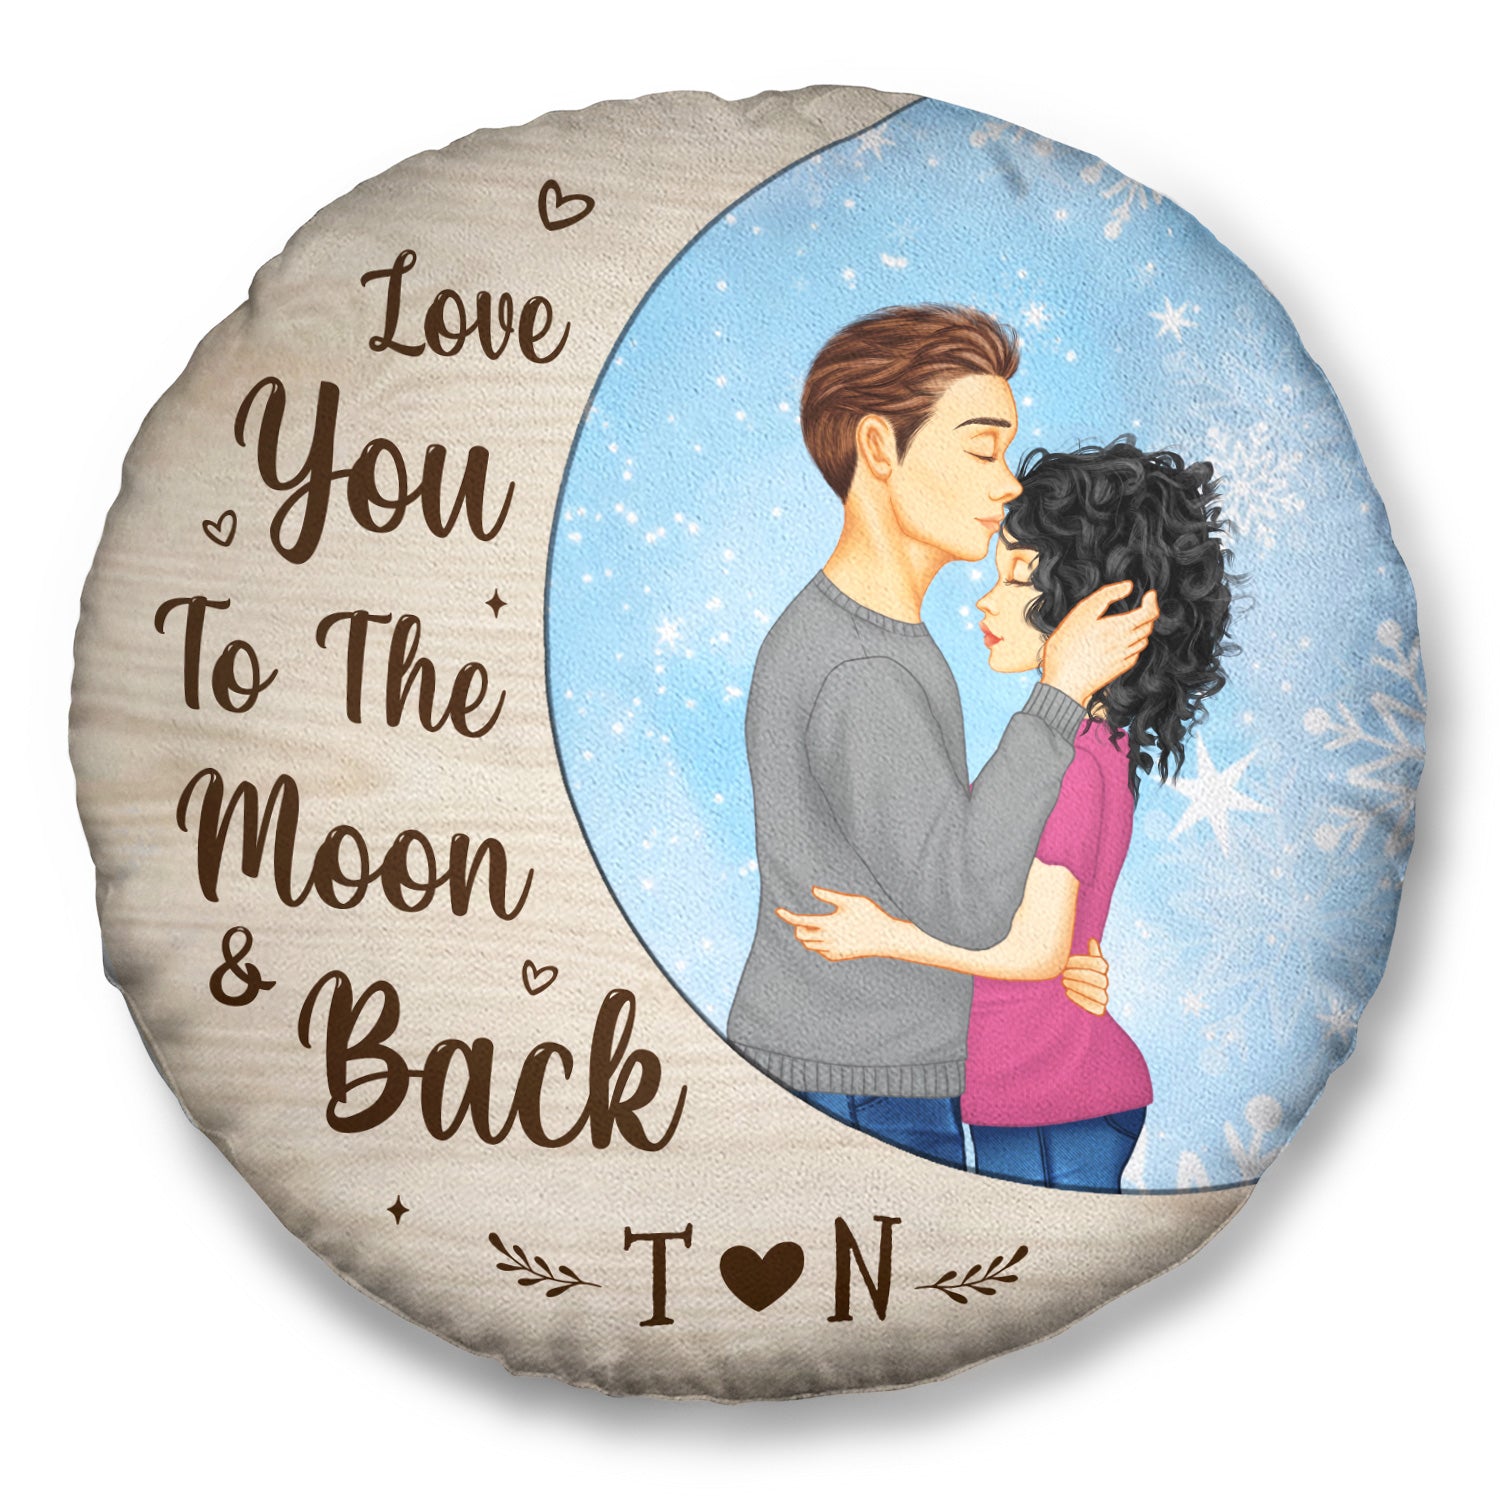 Love You To The Moon - Gift For Couples - Personalized Round Pillow